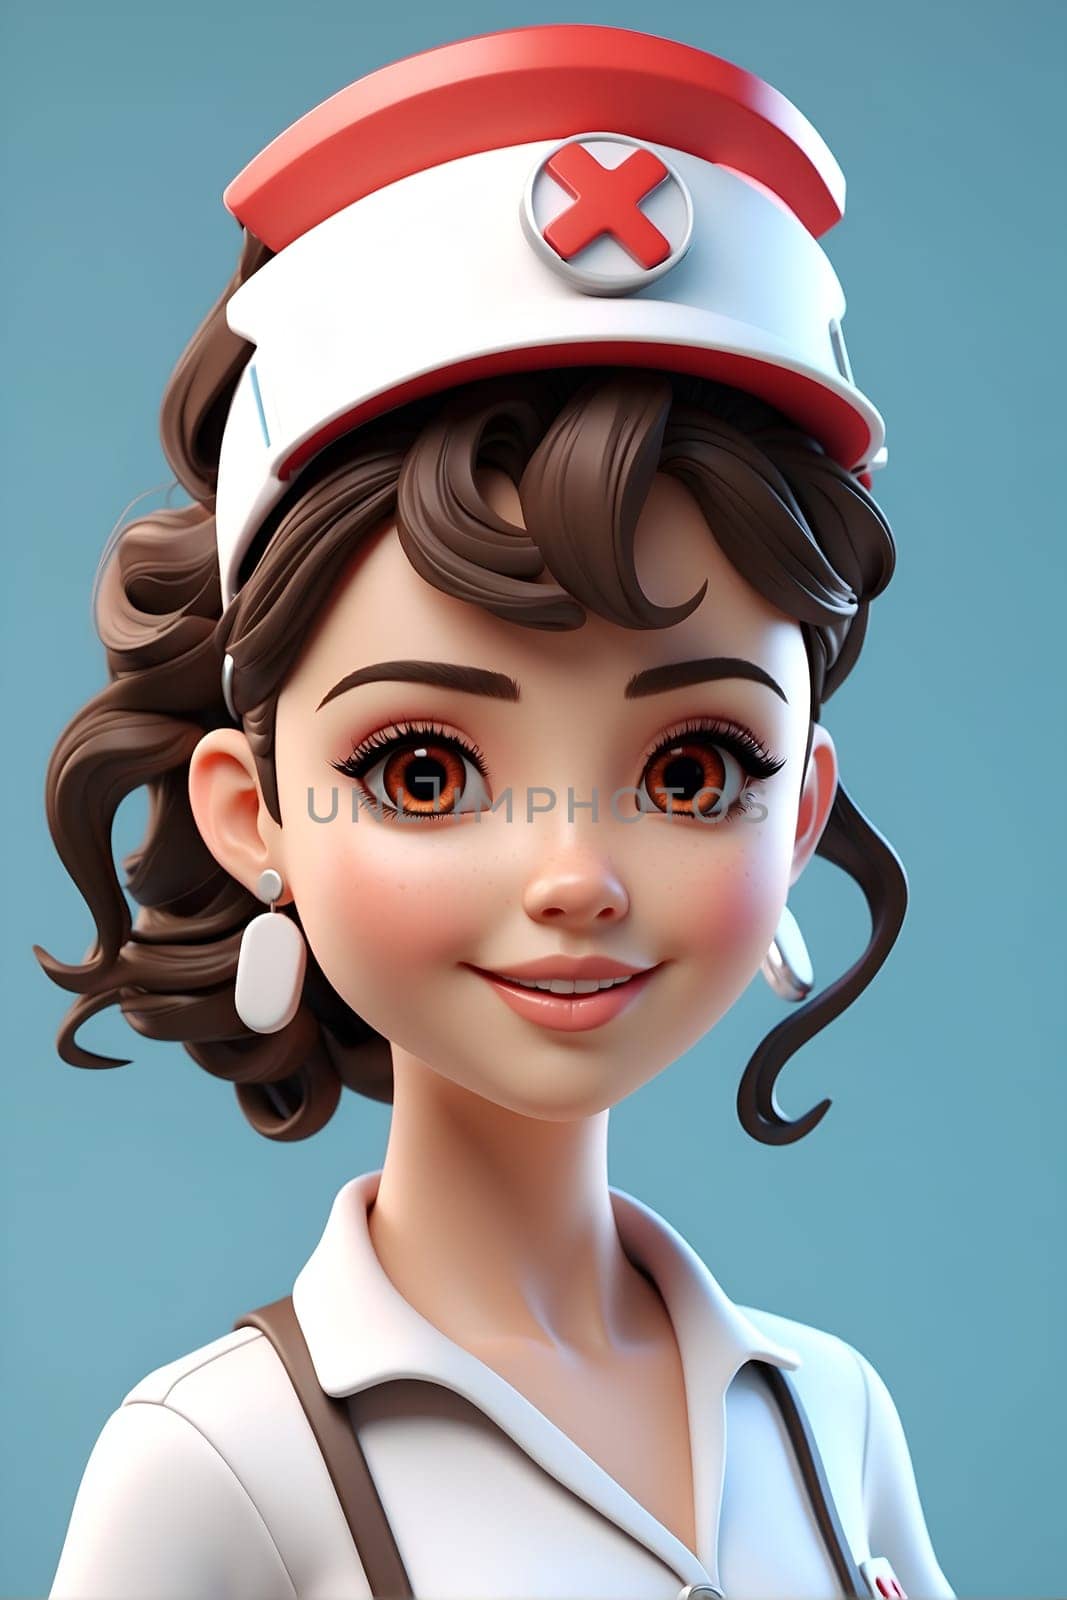 A cheerful cartoon character wears a nurses hat, bringing a vibrant and animated touch to healthcare illustrations.